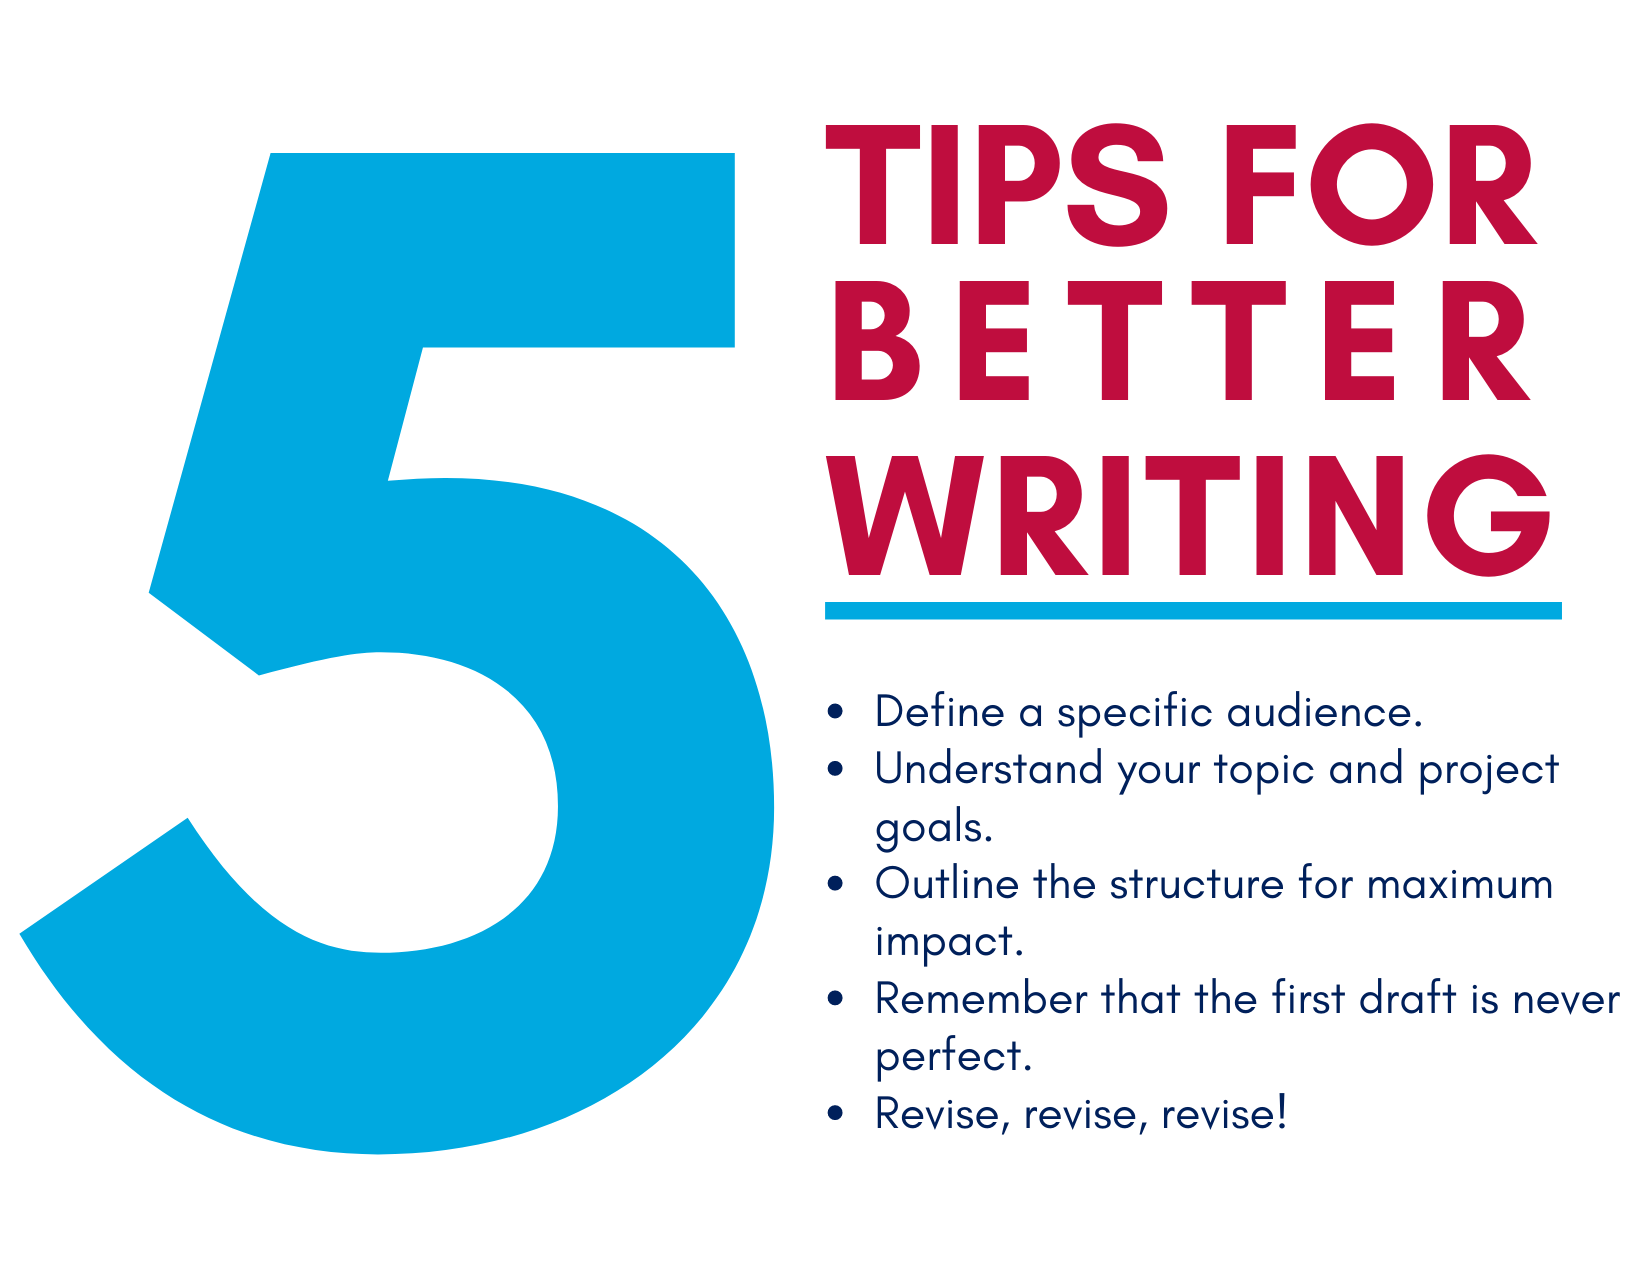 Five tips for better writing: 1. Define a specific audience. 2. Understand your topic and project goals. 3. Outline the structure for maximum impact. 4. Remember that this first draft is never perfect. 5. Revise, revise, revise! 